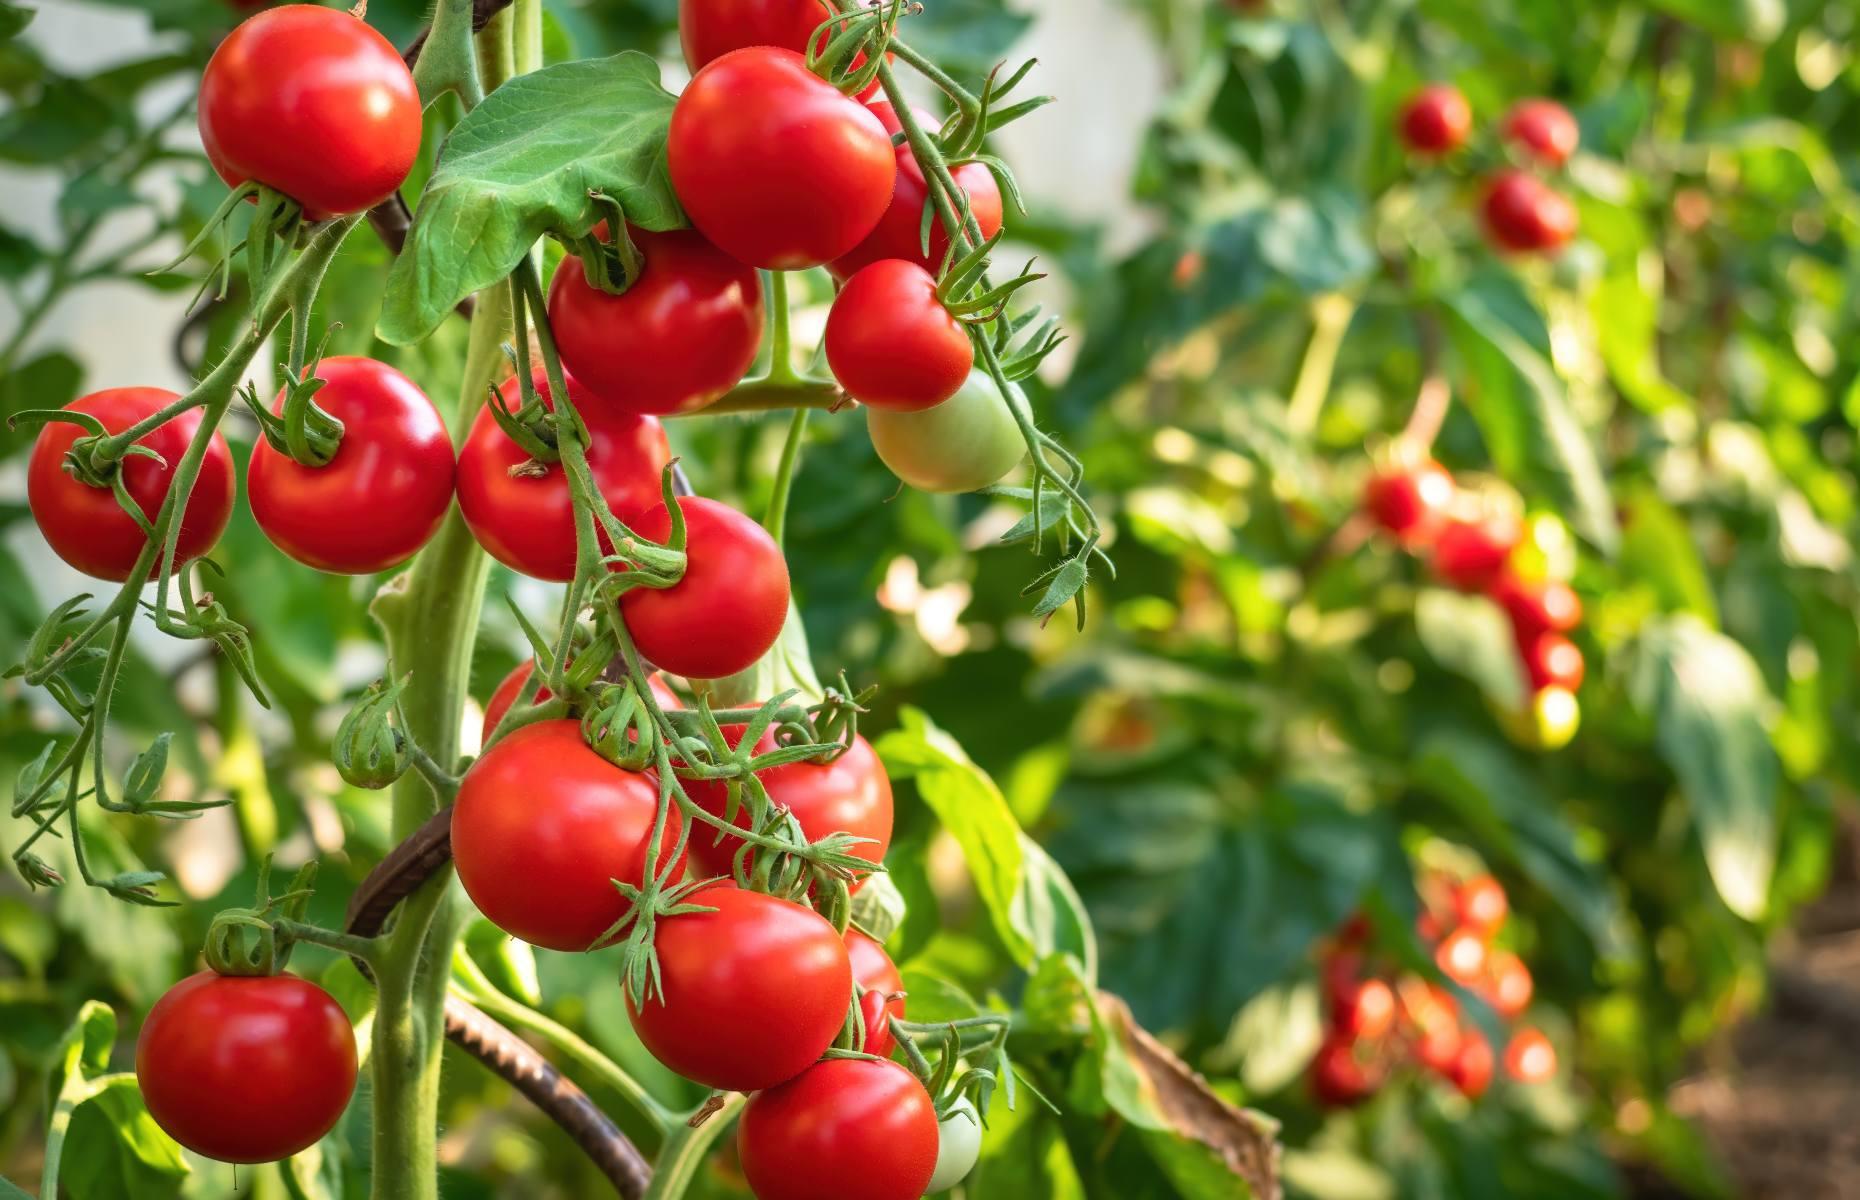 <p>Tomatoes are a good example of a crop that benefits from <a href="https://www.loveproperty.com/gallerylist/80545/growyourown-inventions-that-can-feed-your-family">starting off indoors</a>. All you need is some seed compost, a seed container and propagator, if you have one, a sunny window ledge if you don’t. Sow your seeds at two-inch intervals, cover with a layer of compost and water well. Transfer the seedlings to pots and when they’re bigger and the weather is warmer, you can plant them outside in the ground.  </p>